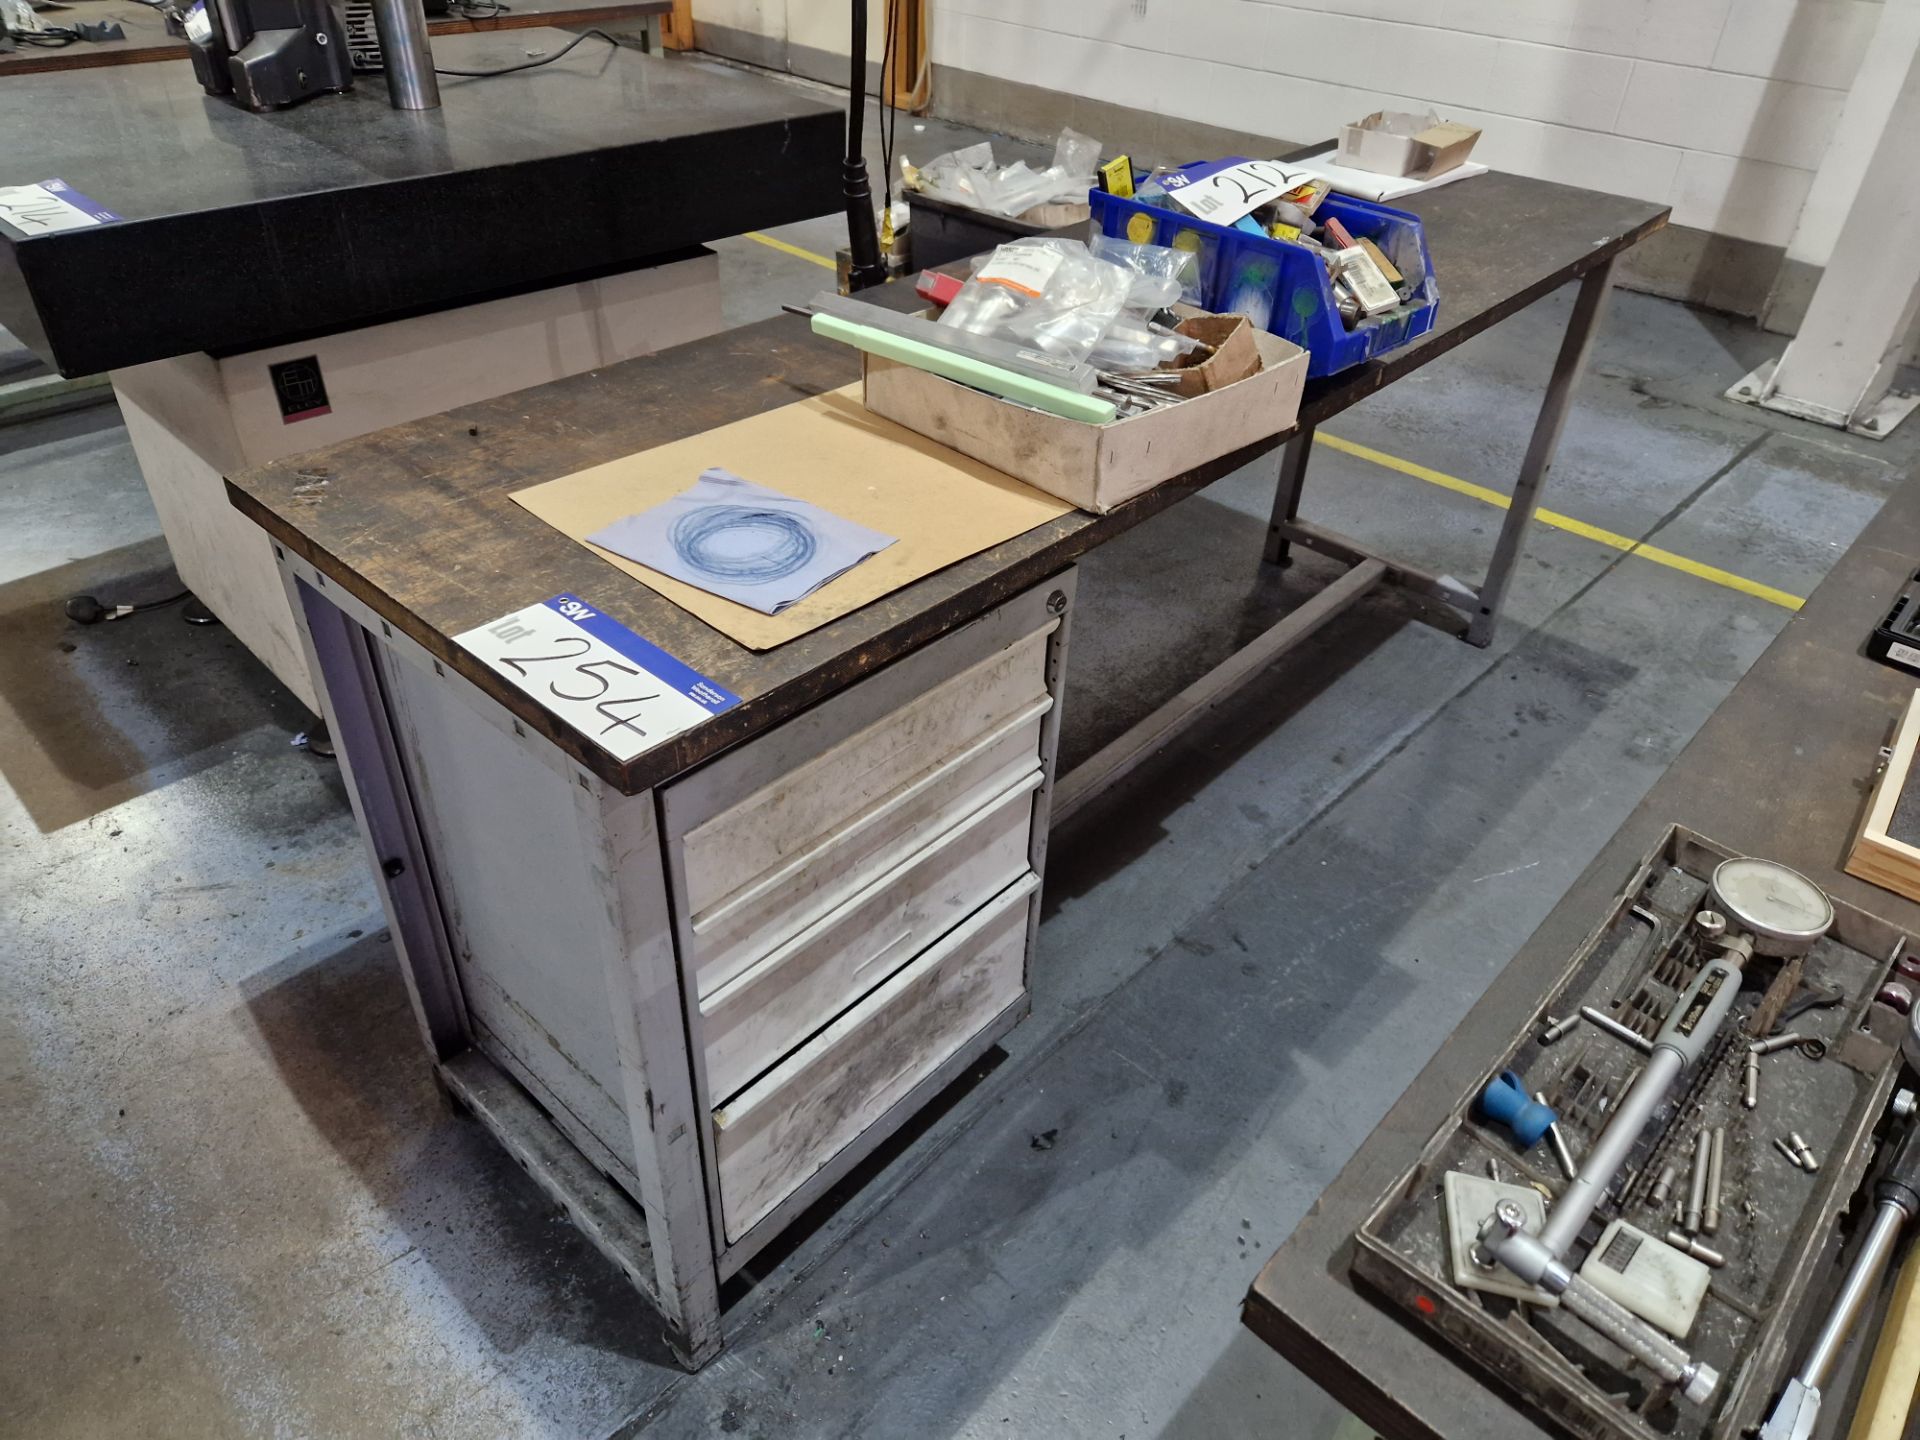 Metal Framed Wooden Top Pedestal Workbenches, Approx. 2m x 0.6m x 0.85mPlease read the following